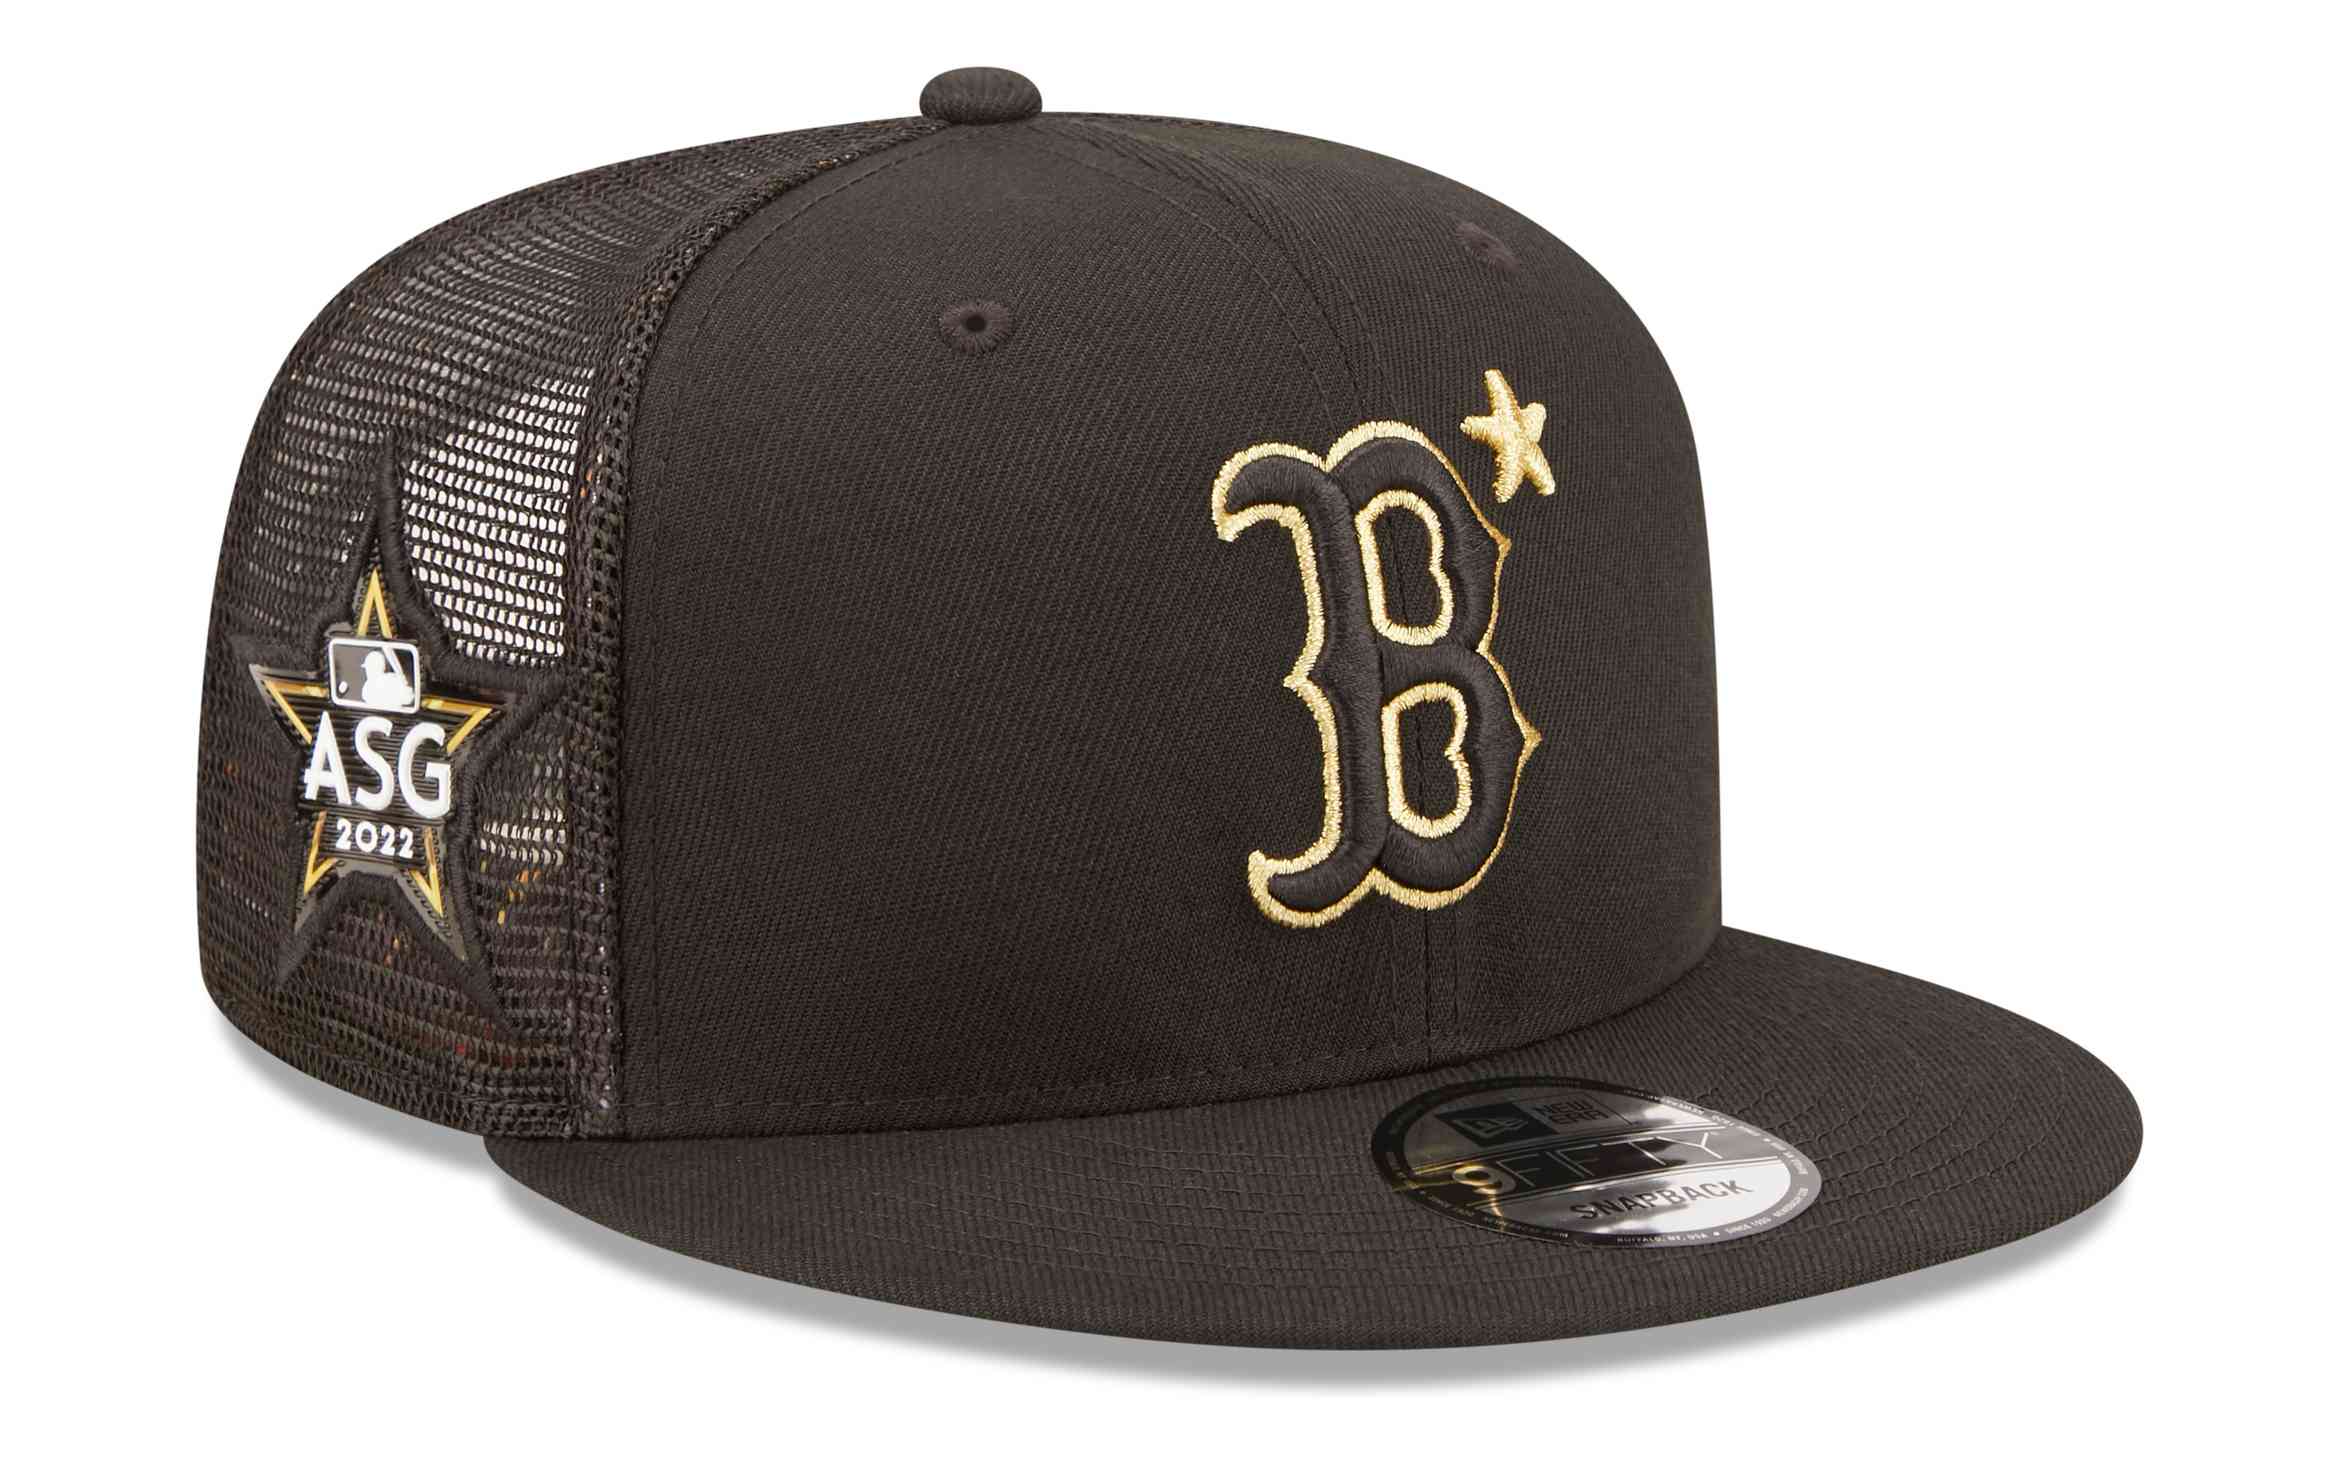 New Era - MLB Boston Red Sox All Star Game Patch 9Fifty